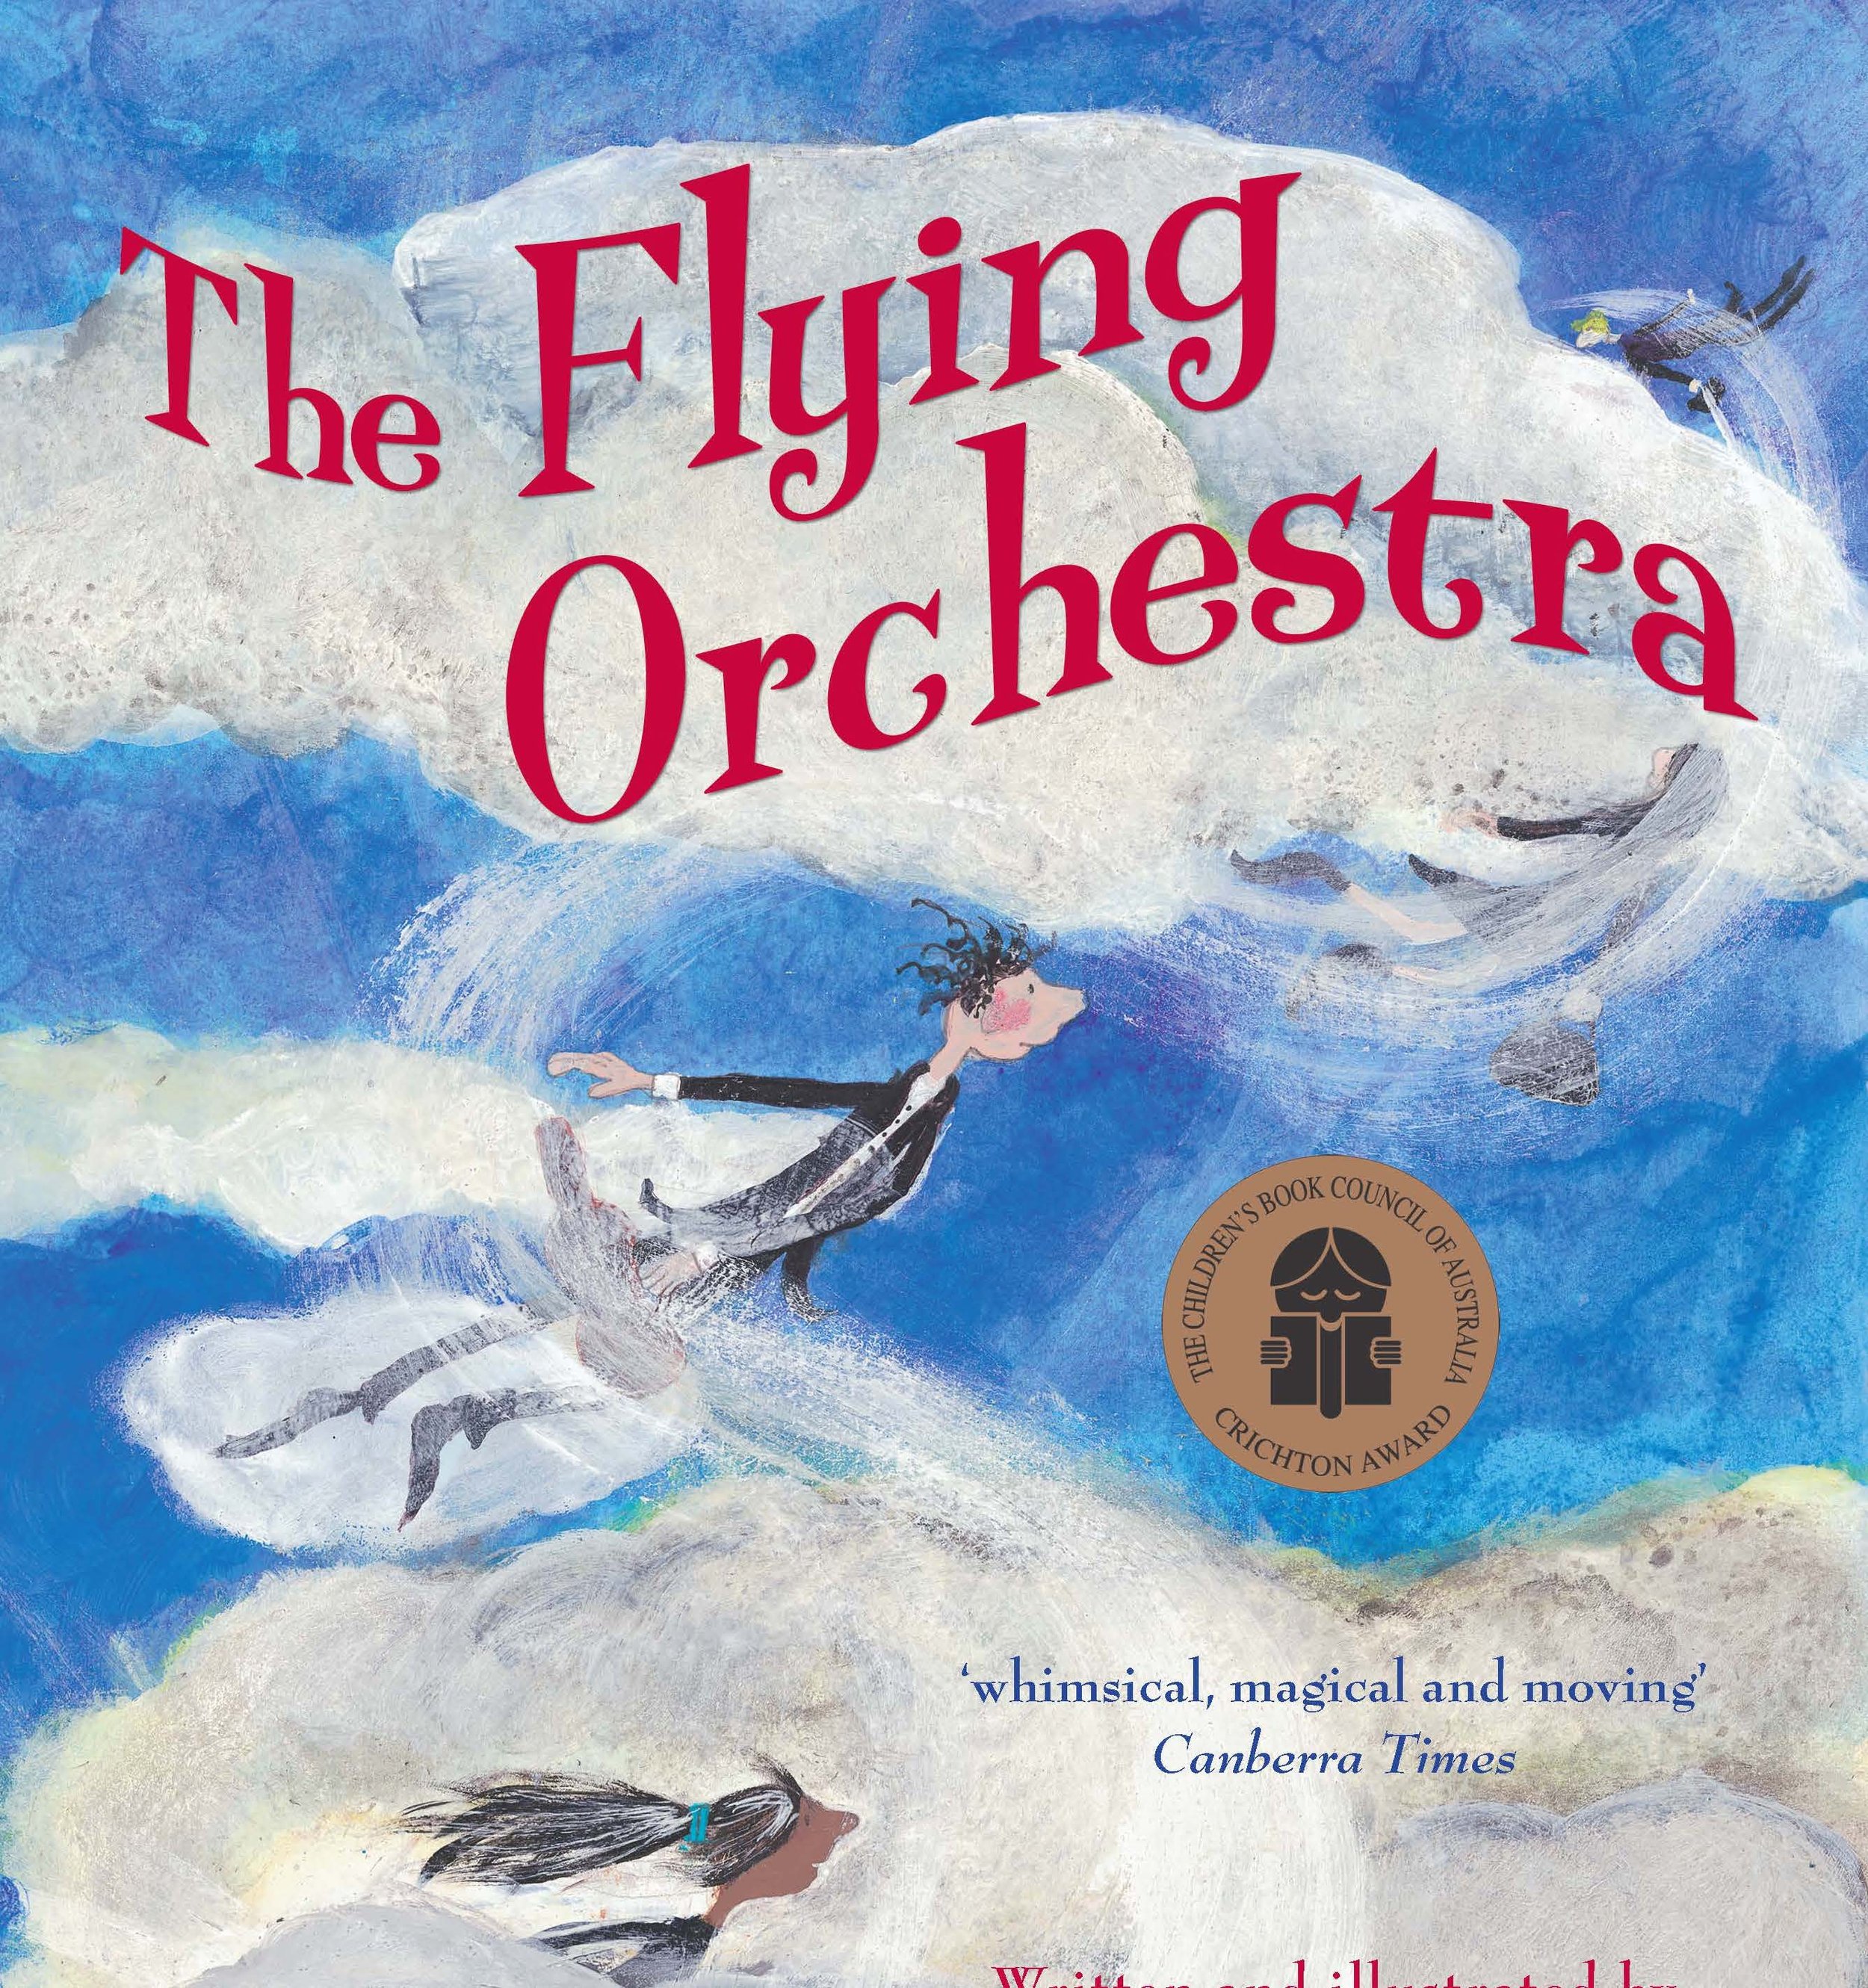 The Flying Orchestra cover update aw.jpg